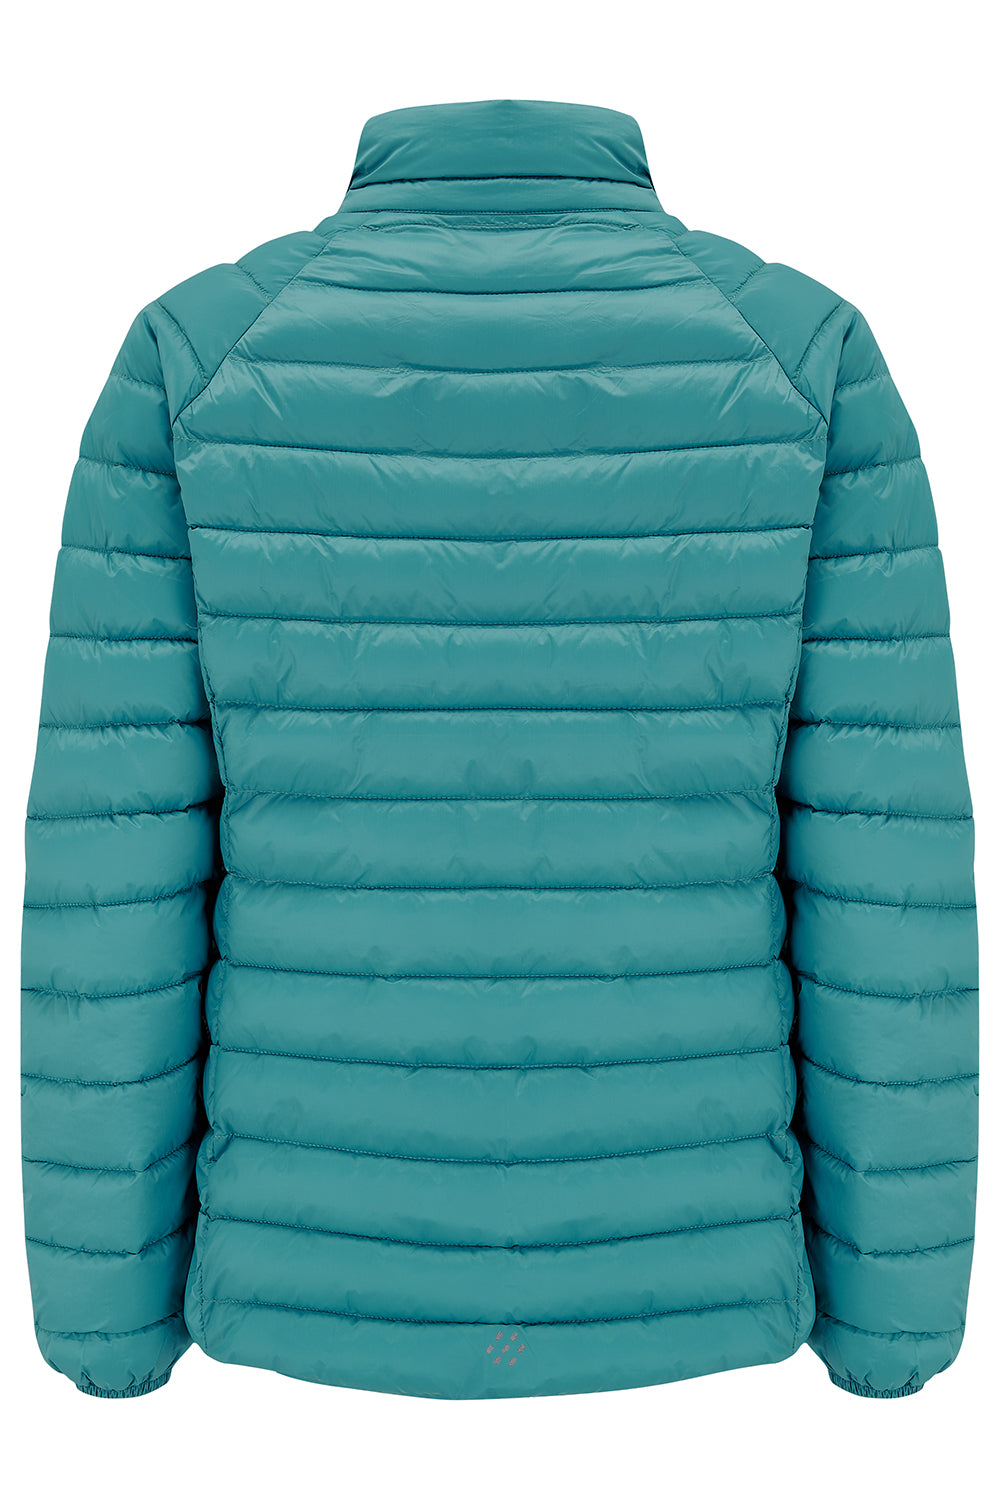 Synergy -  Women's Insulated Jacket - Soft Teal